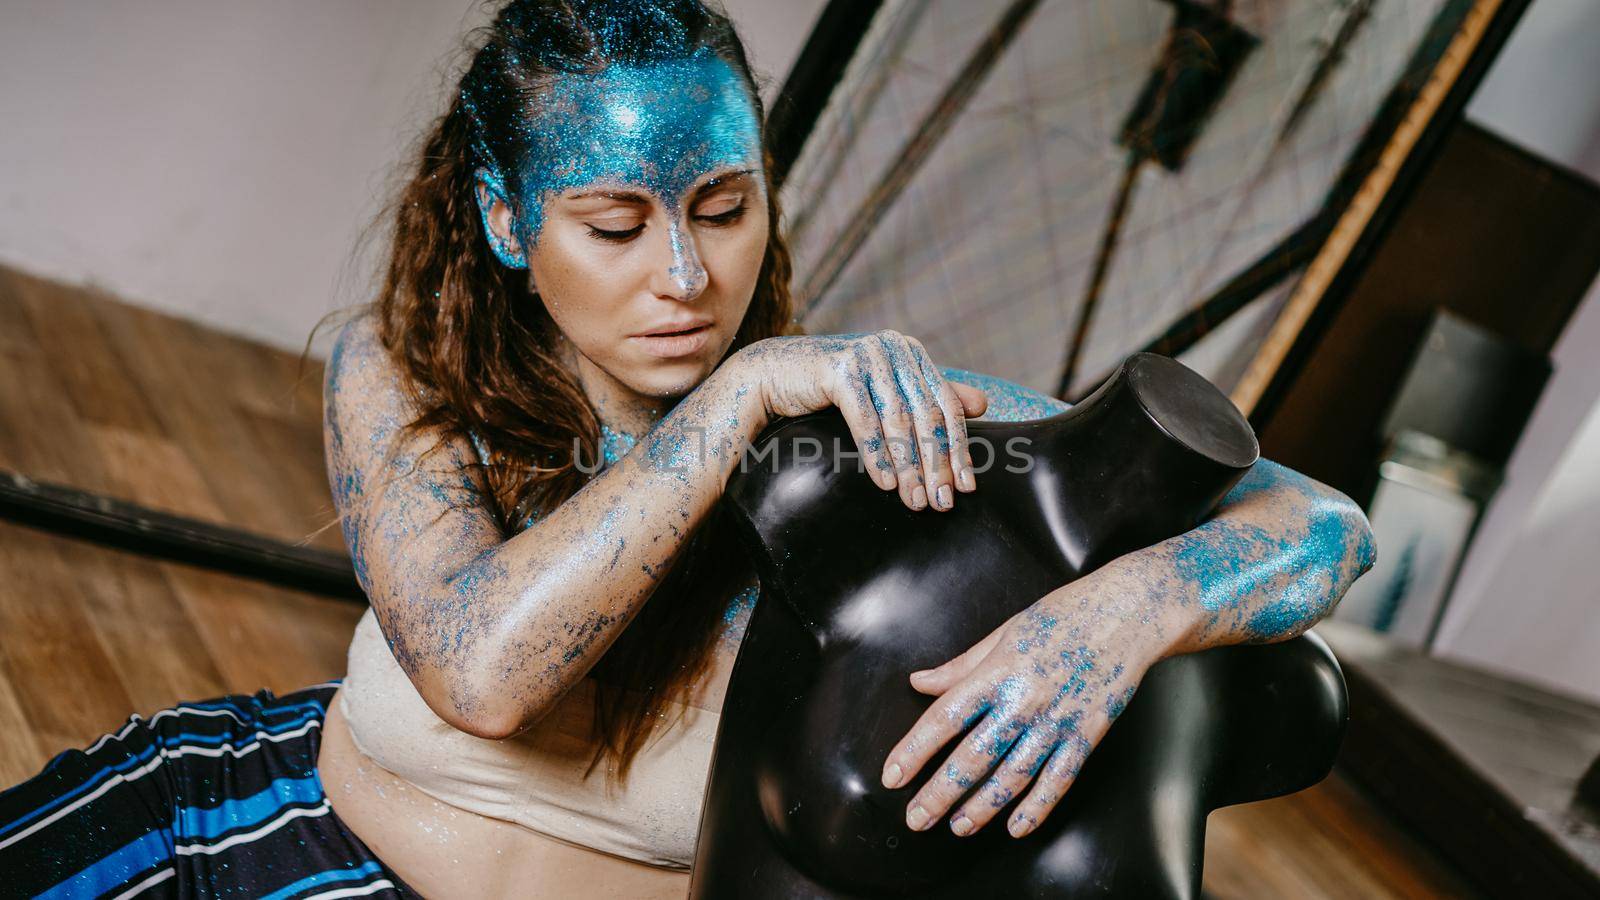 Artist in workshop. Woman with blue sparkles on her face. The concept of freaks and creative people. People are different from others. Individuality